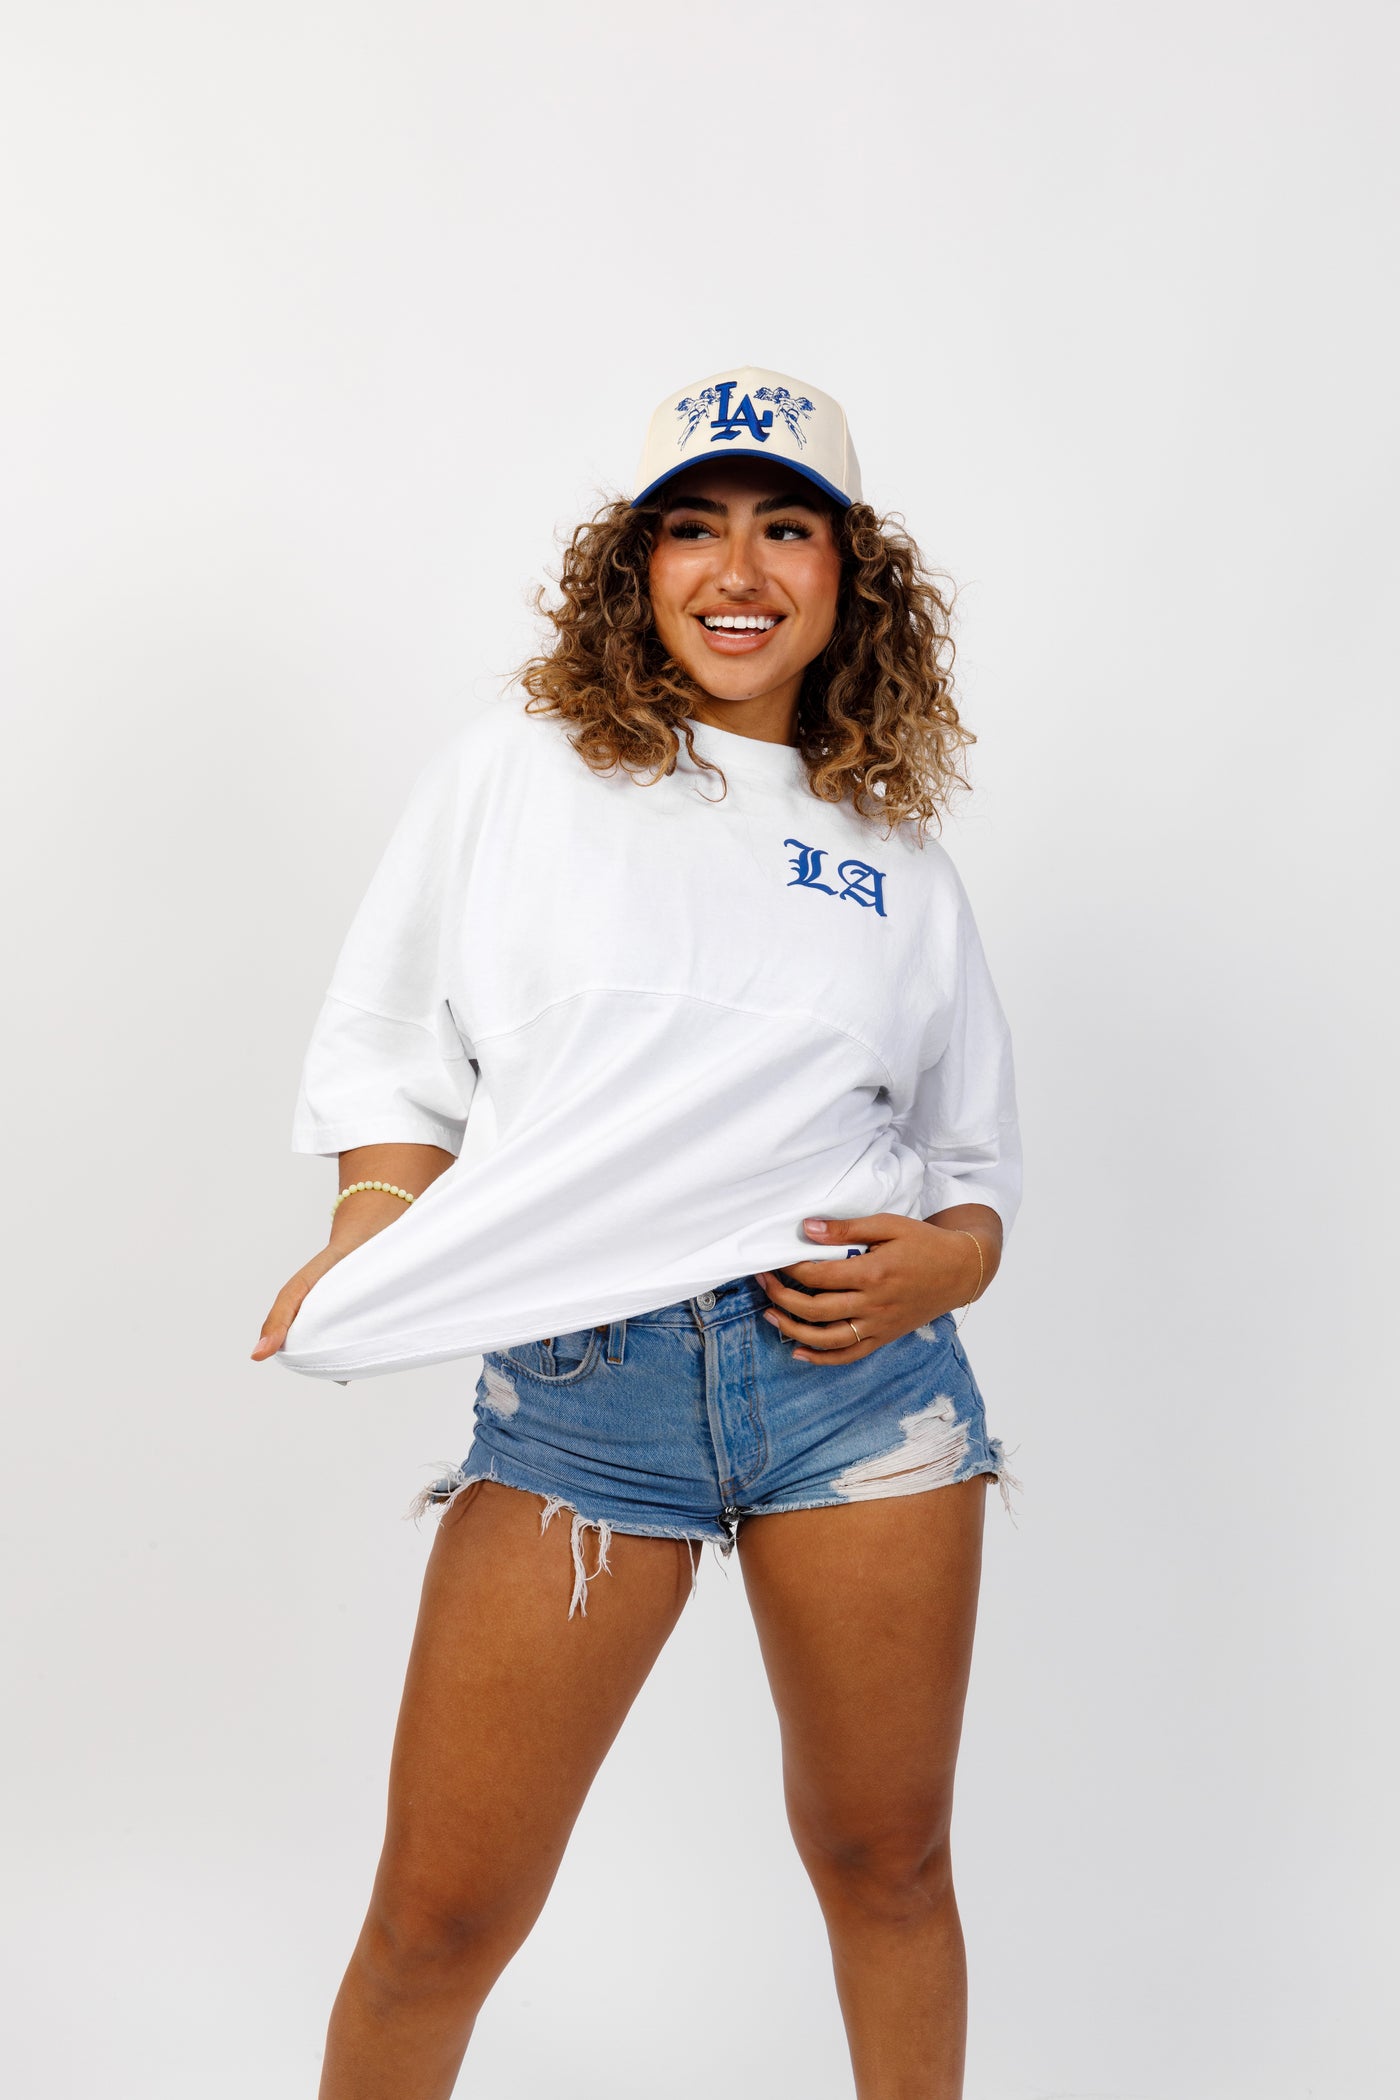 Los Angeles Dodgers Shirt Womens Small Blue White Spirit Jersey Oversized  Ladies